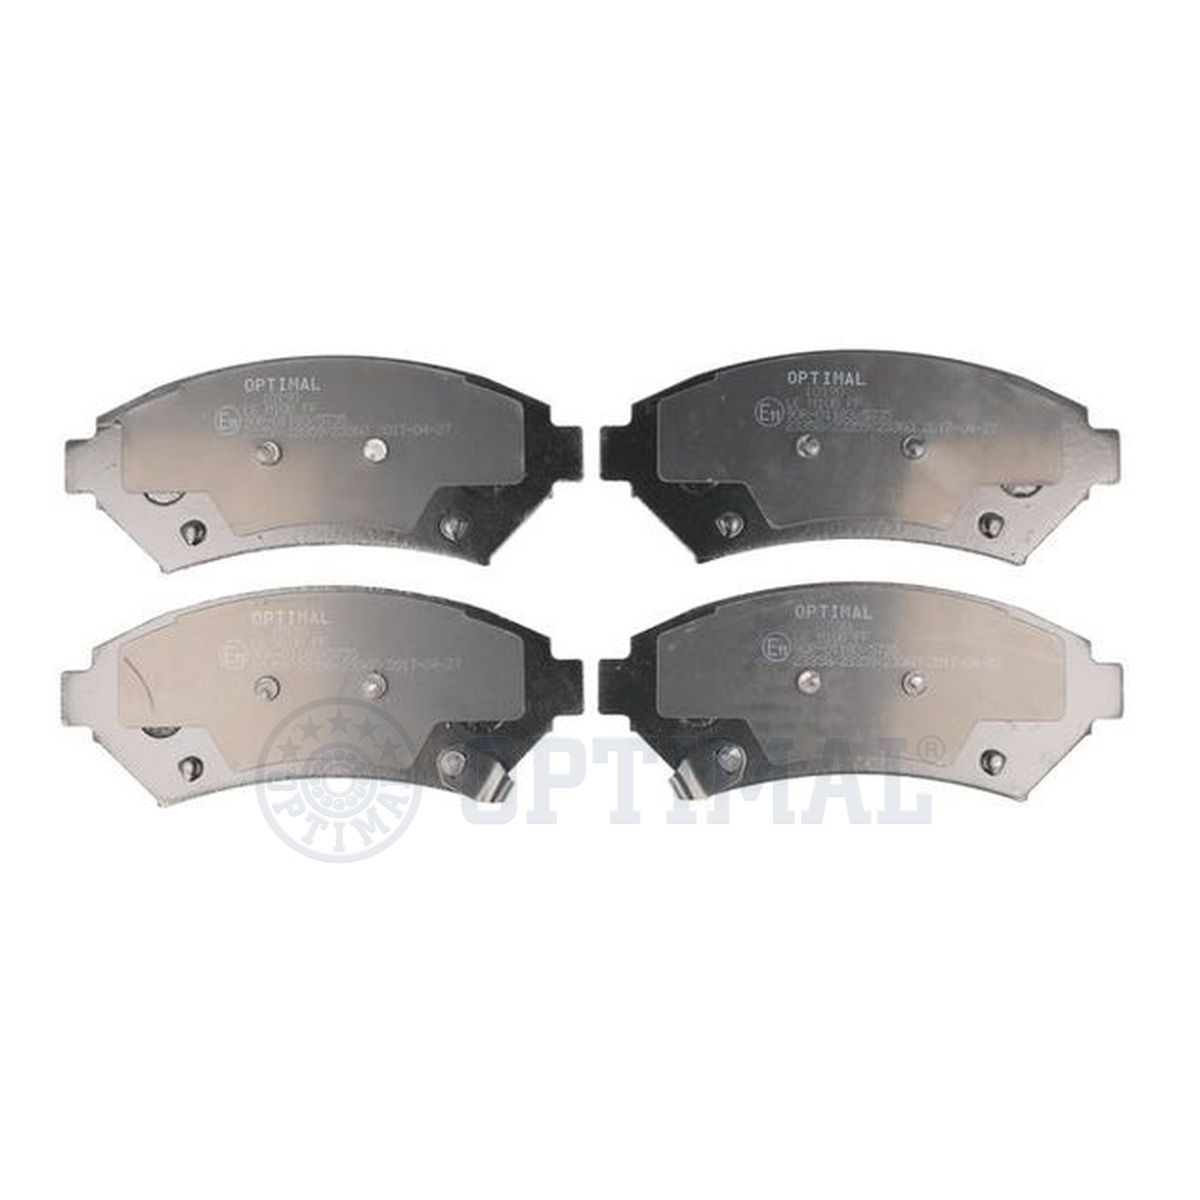 OPTIMAL 10190 Brake pad set Front Axle, with acoustic wear warning